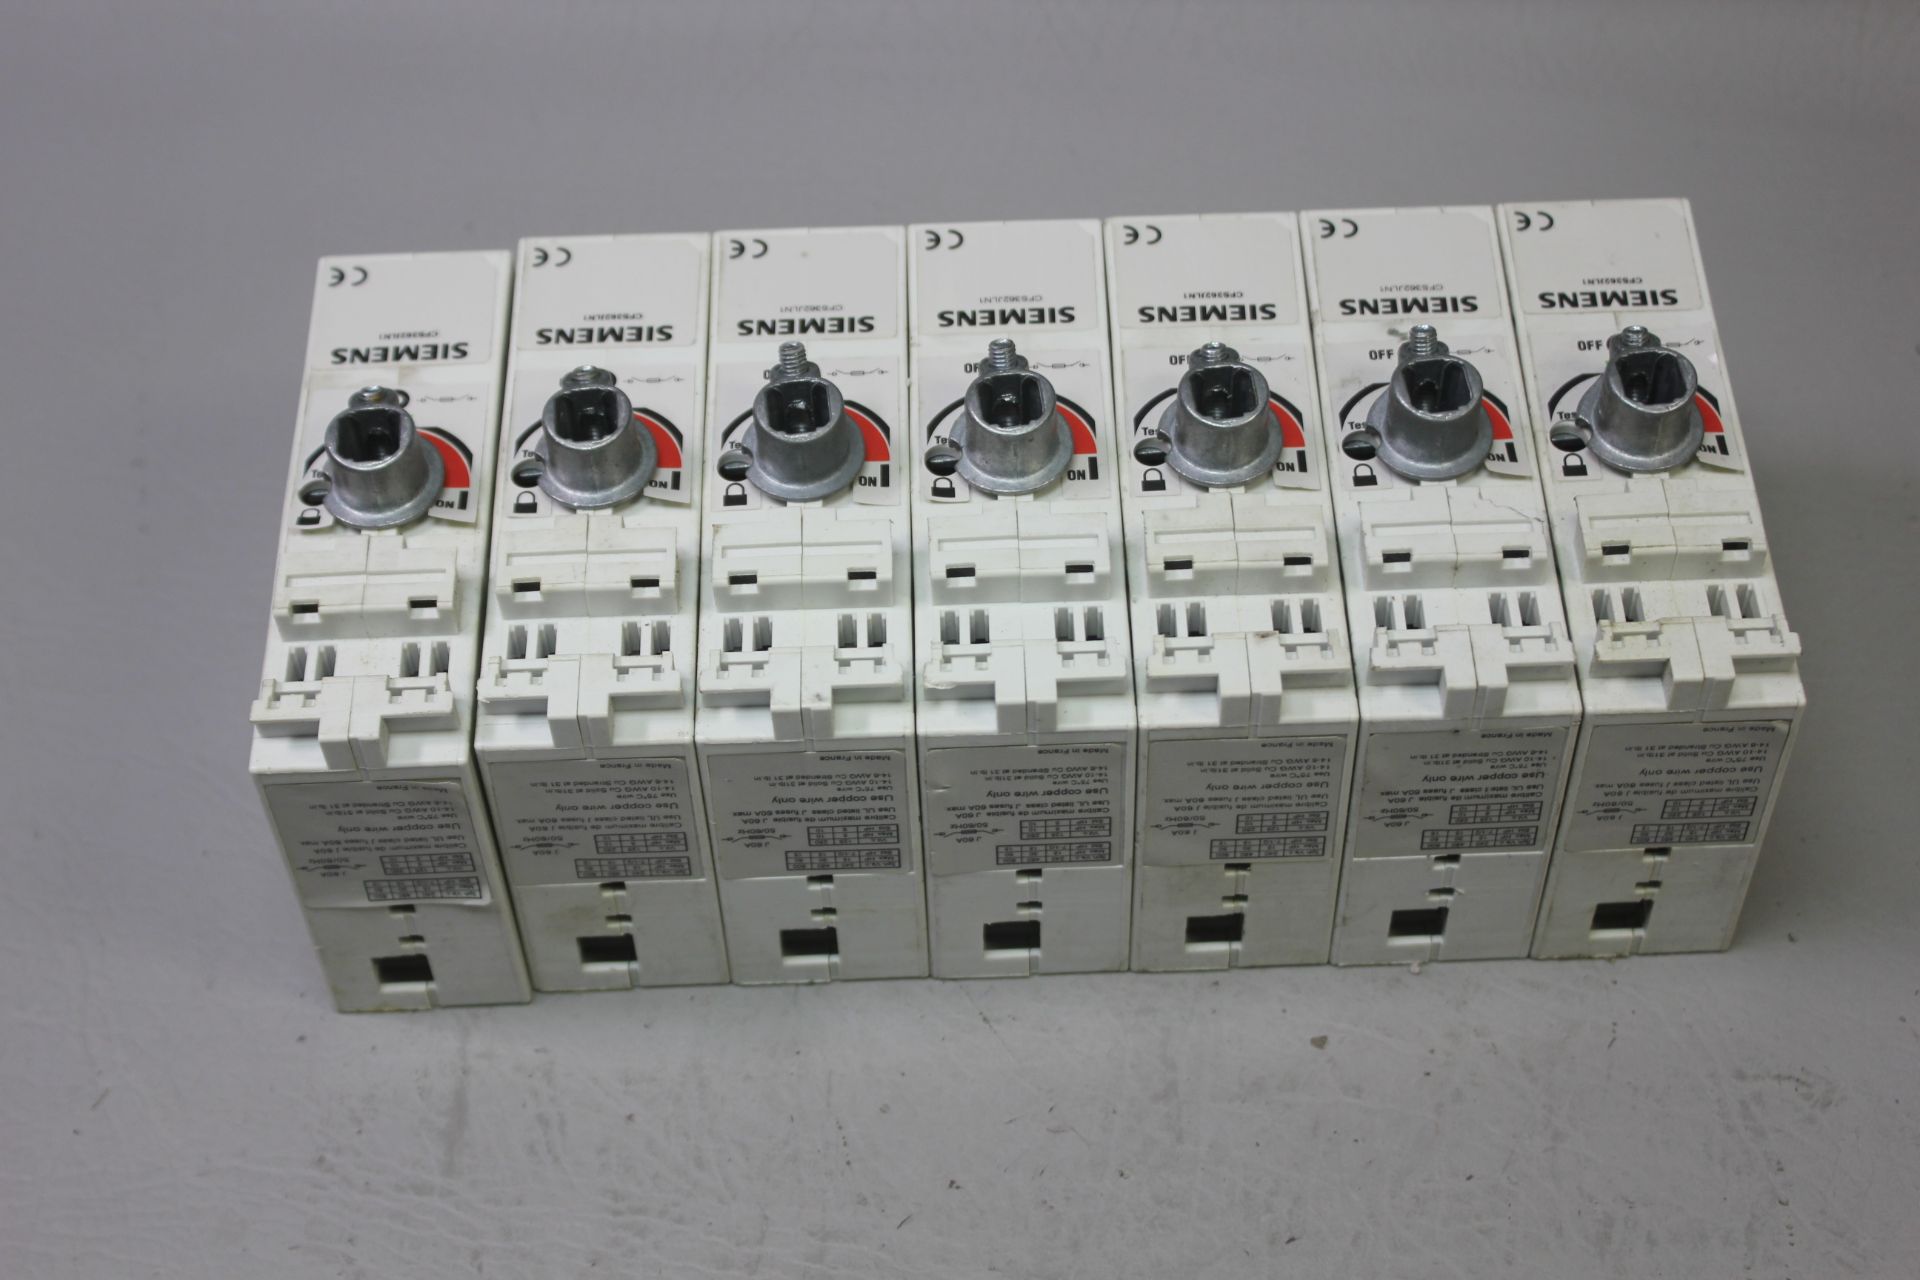 LOT OF 7 SIEMENS DISCONNECT SWITCHES - Image 2 of 4